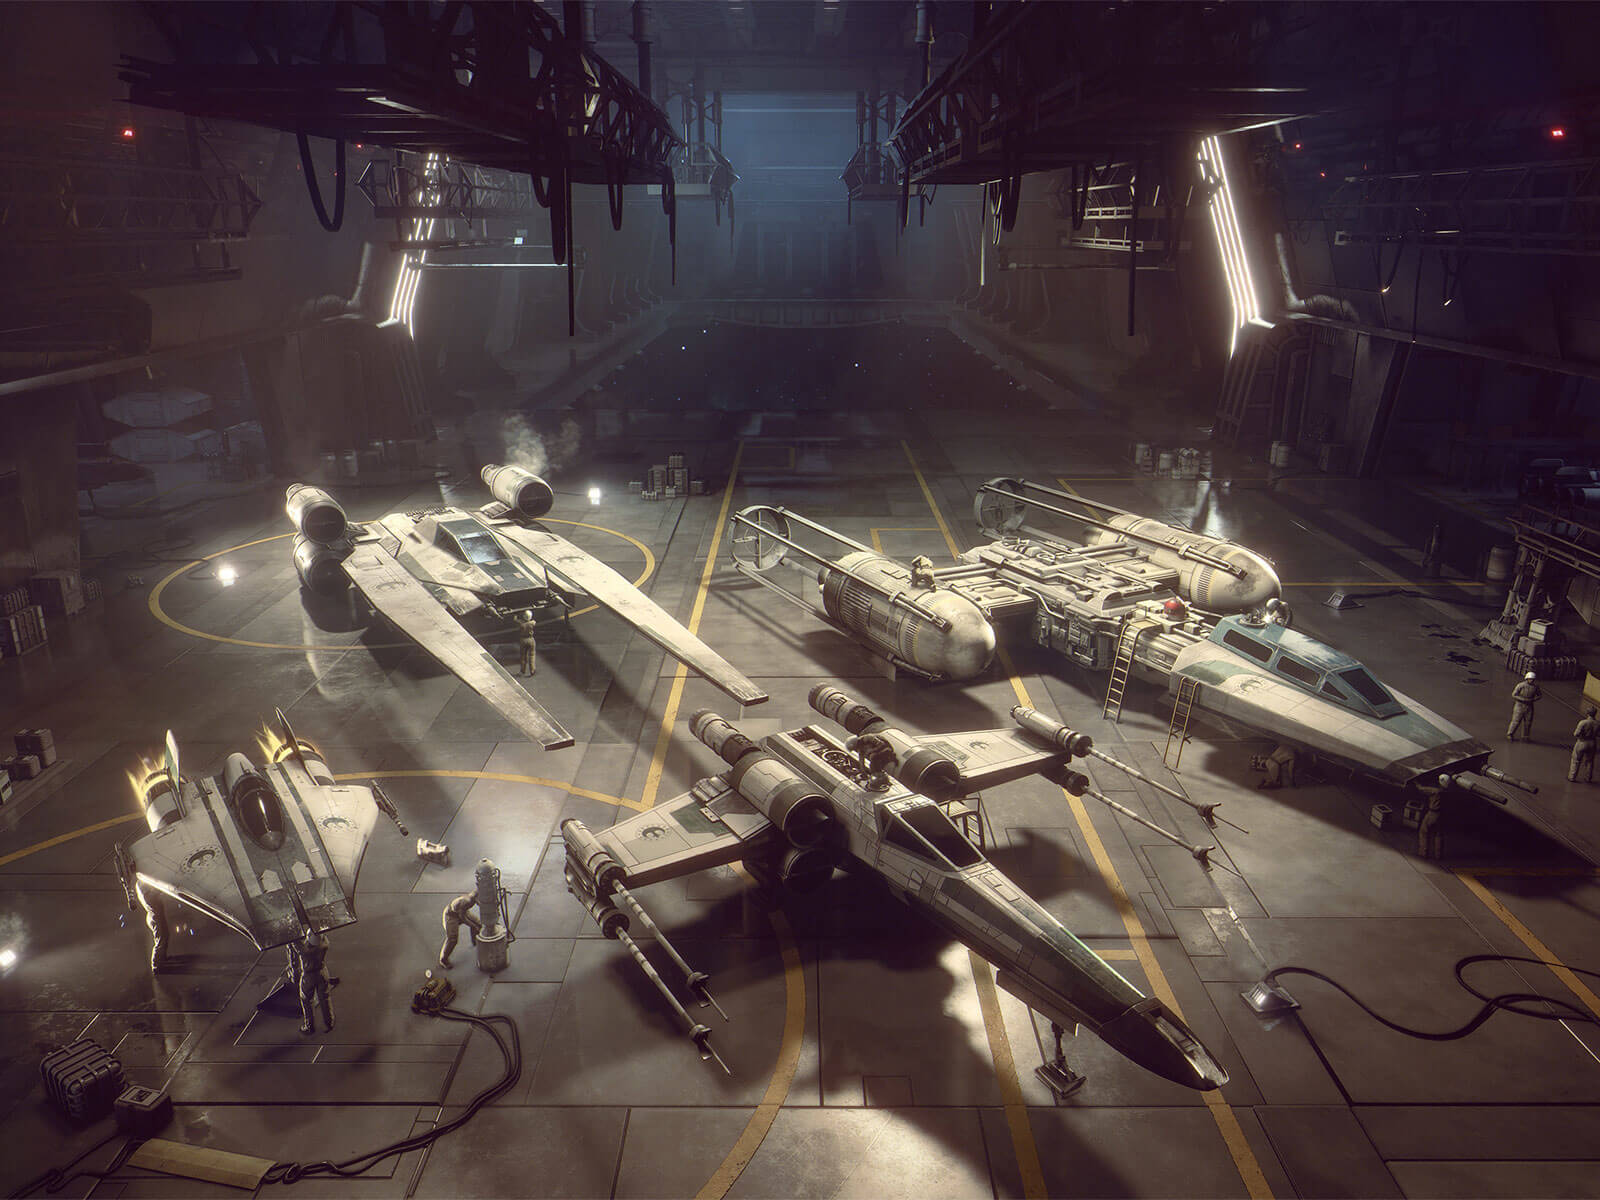 An X-Wing fighter and other Rebel Alliance ships sit in a hangar